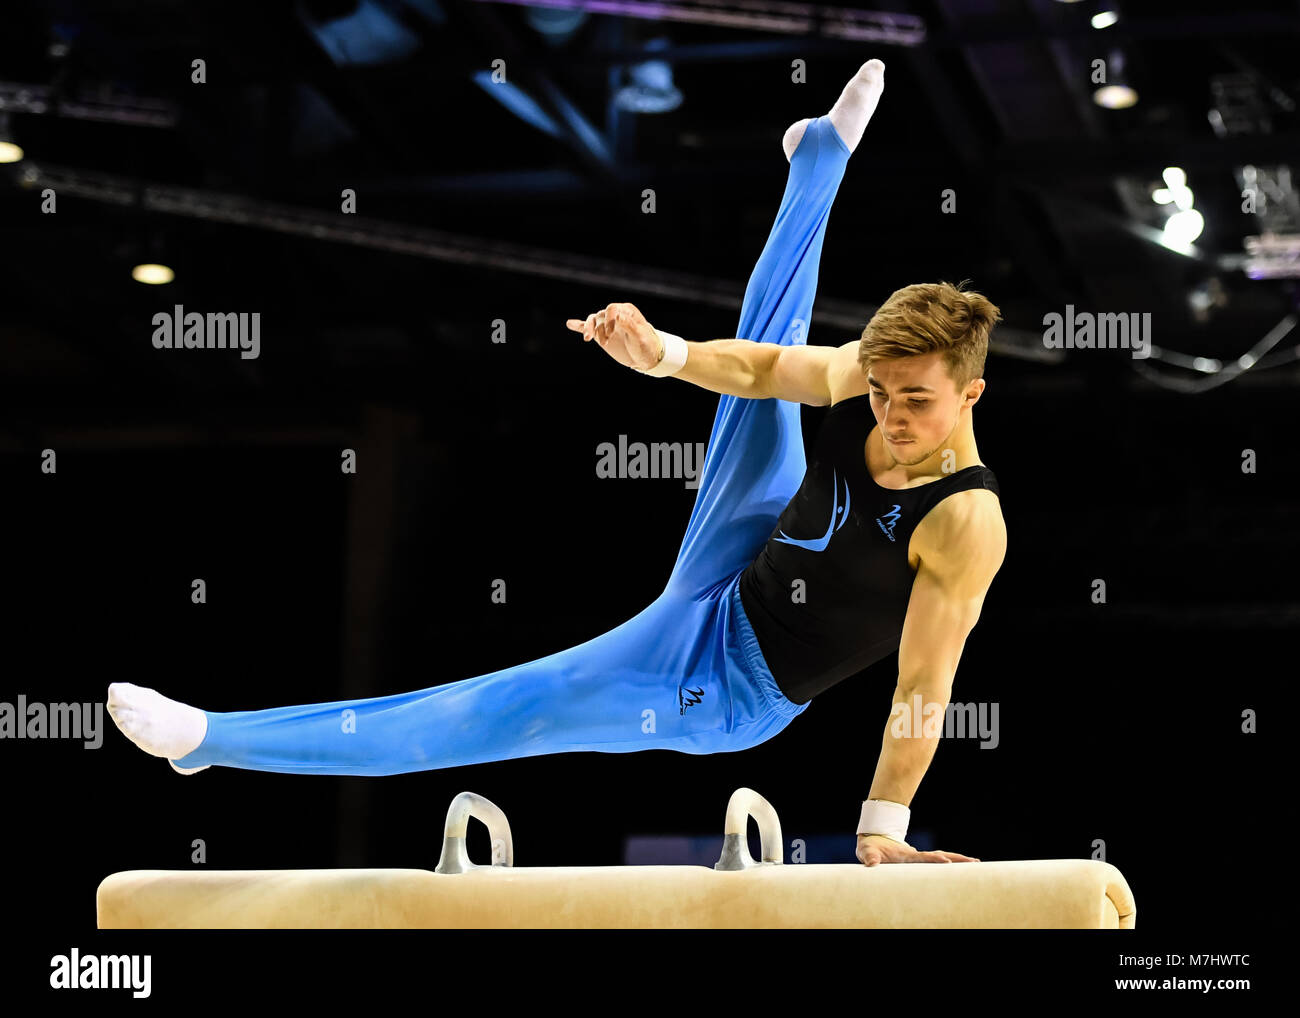 Liverpool, UK. 10th March, 2018. Sam Oldham competes on the Pommel Horse during the Man's All-Round competition of the 2018 Gymnastics British Championships at Echo Arena on Saturday, 10 March 2018. LIVERPOOL ENGLAND. Credit: Taka G Wu Credit: Taka Wu/Alamy Live News Stock Photo